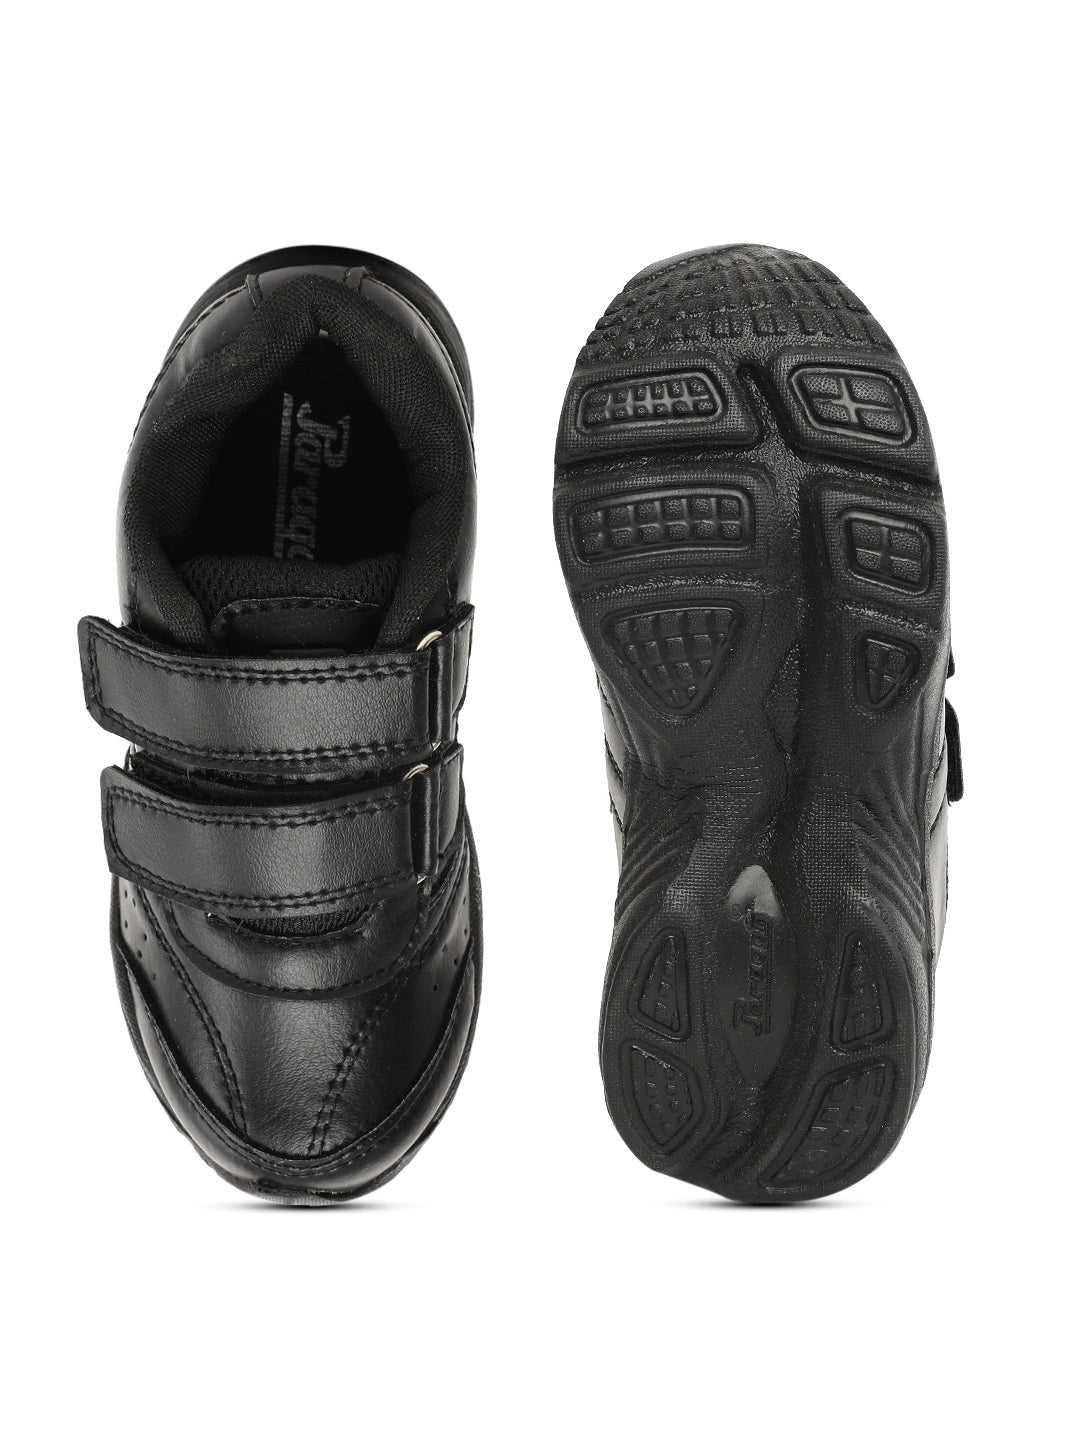 Paragon  R10600K Kids Formal School Shoes | Comfortable Cushioned Soles | School Shoes for Boys &amp; Girls